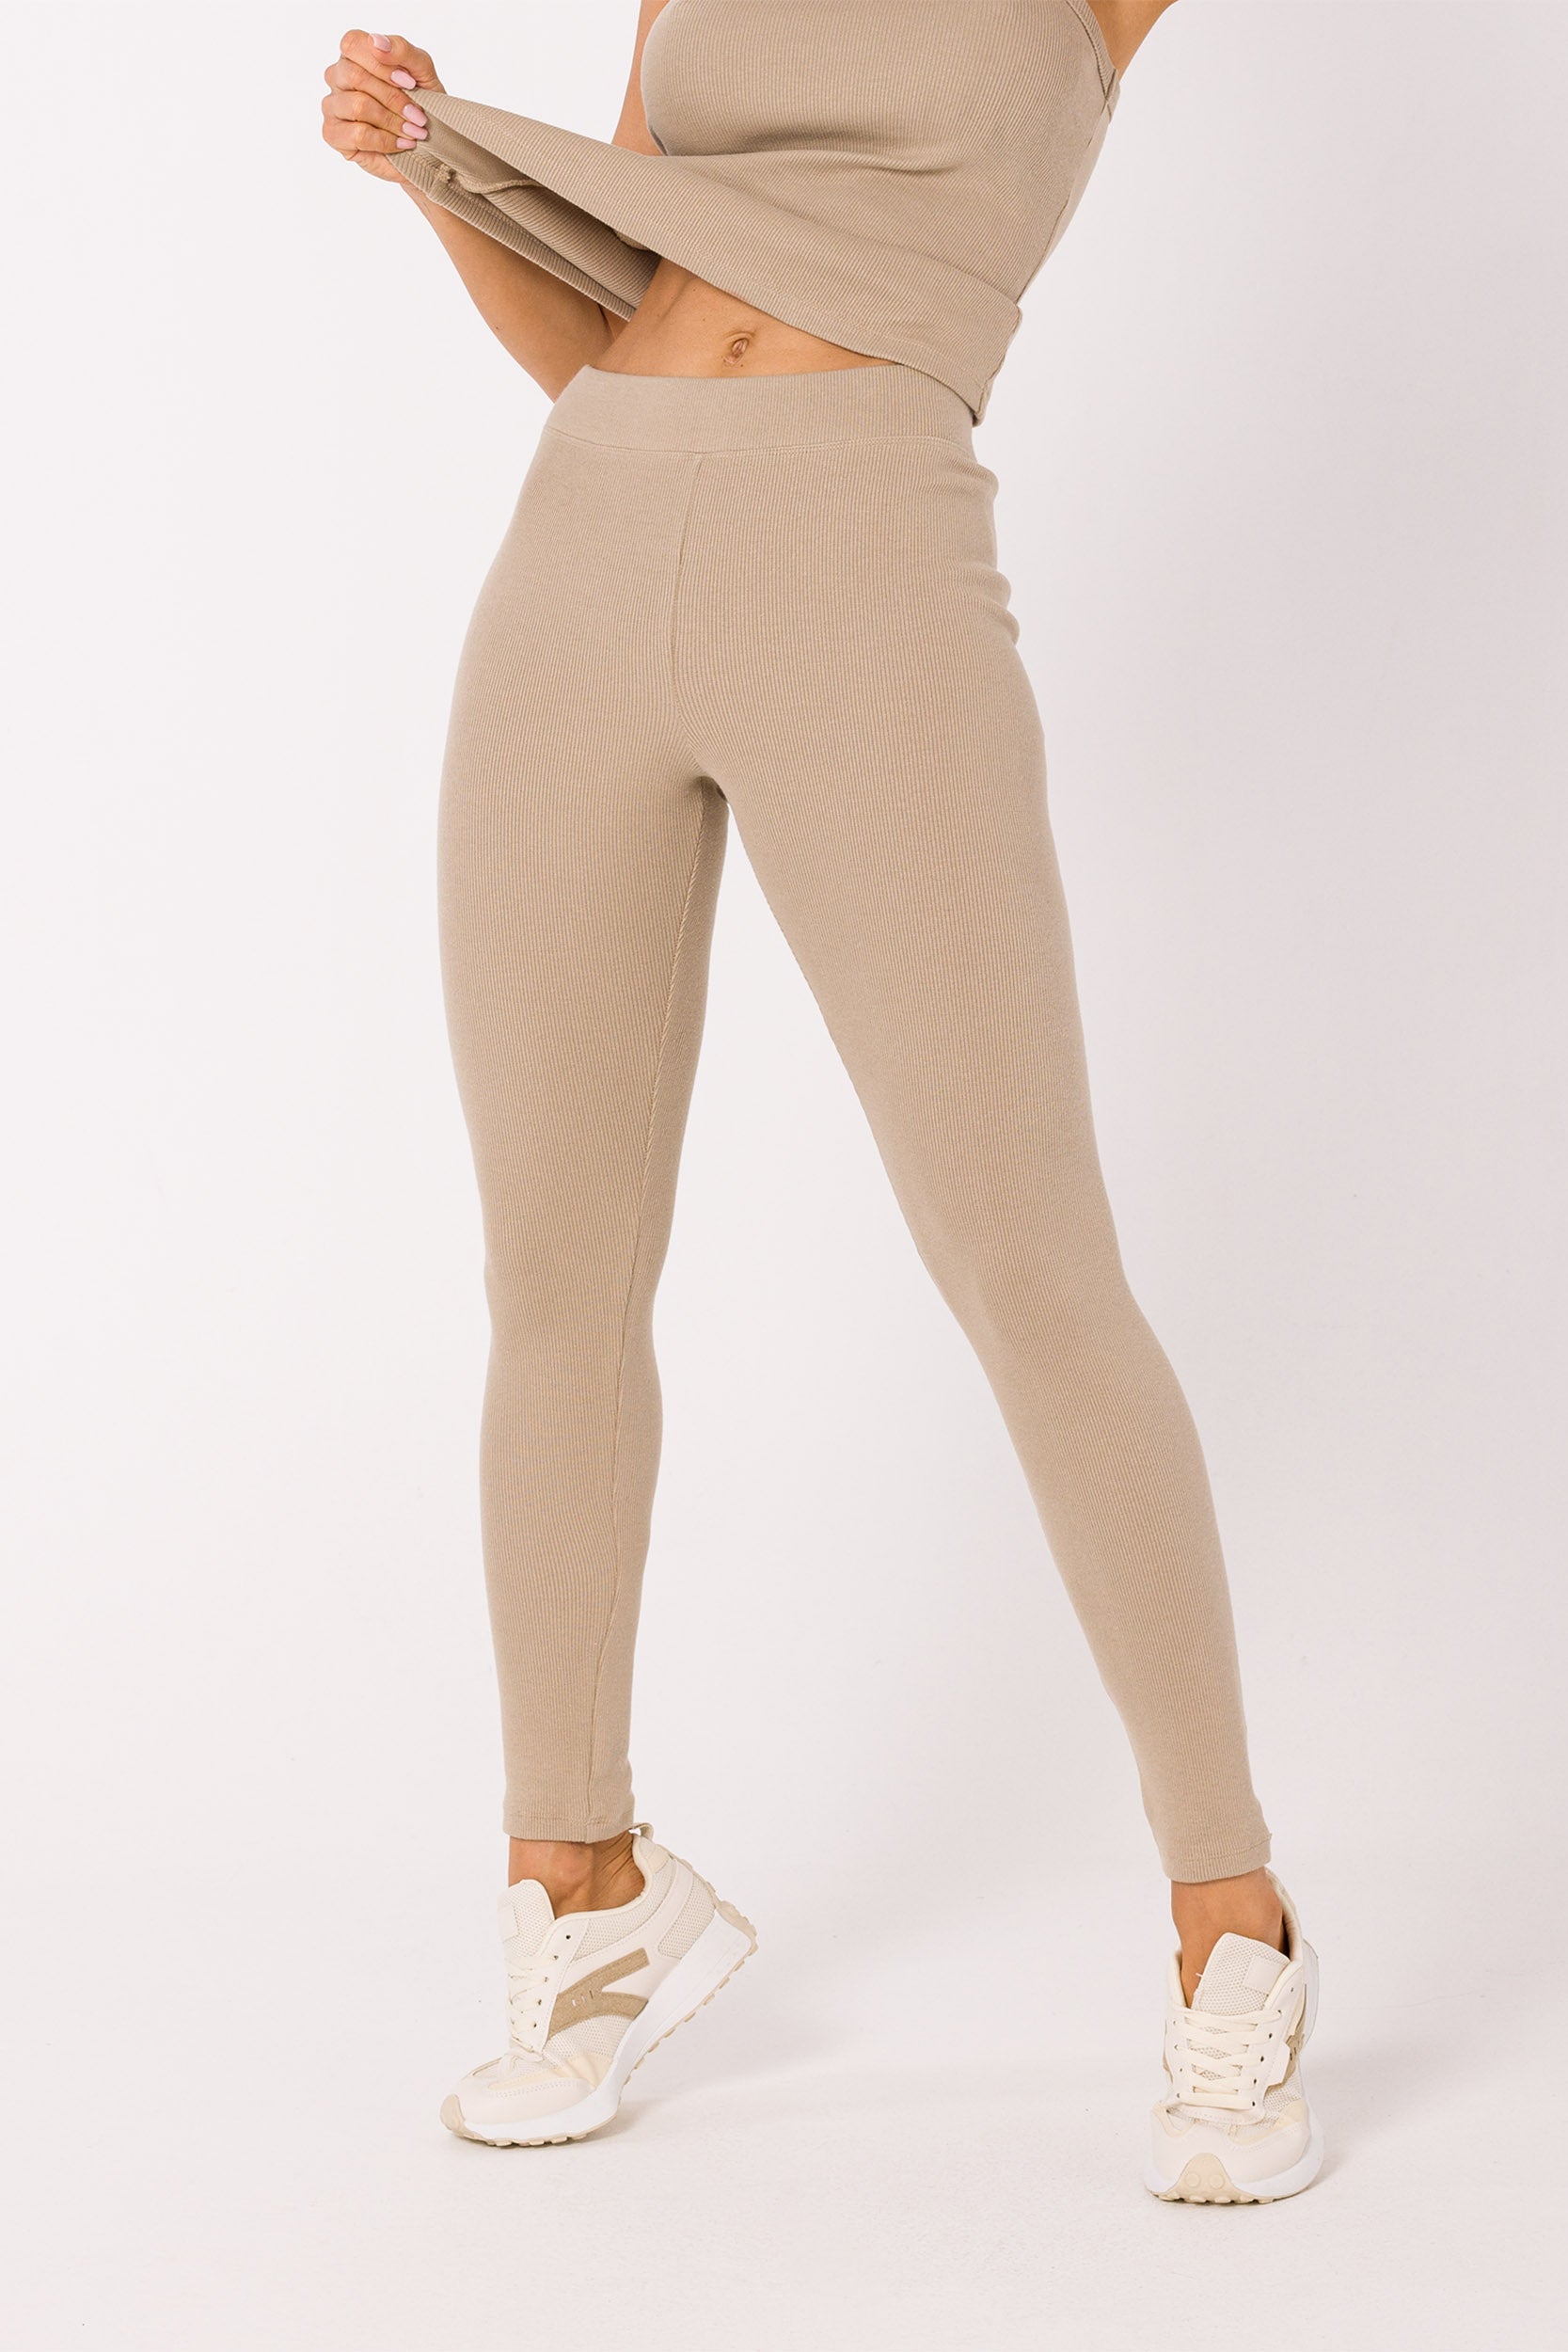 Upgrade your wardrobe with our Beige Ribbed Knit Leggings. Crafted from high-quality ribbed knit fabric, these leggings can be worn as a set with our matching tank top or mixed and matched for various chic outfits. Their neutral beige hue makes them perfect for loungewear, working from home, sports, and running errands. Experience the comfort and style of this essential piece that adapts to your everyday fashion needs.